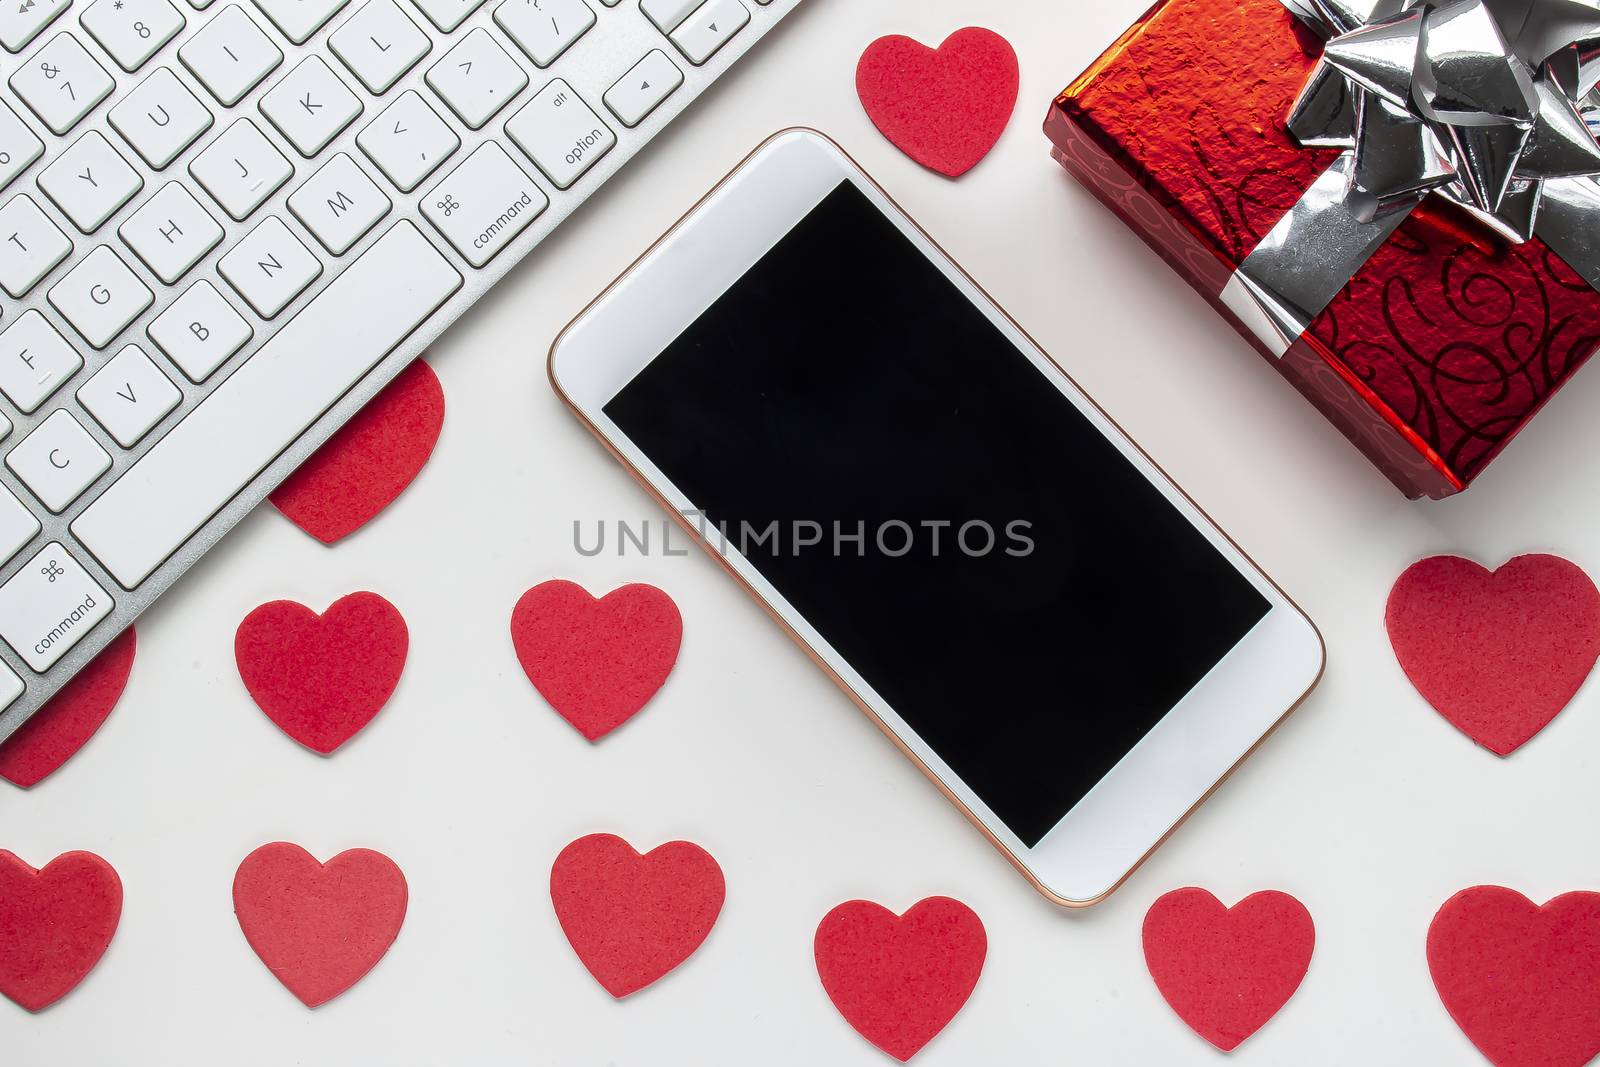 A smartphone with a keyboard and a red present and red hearts on a white background by oasisamuel